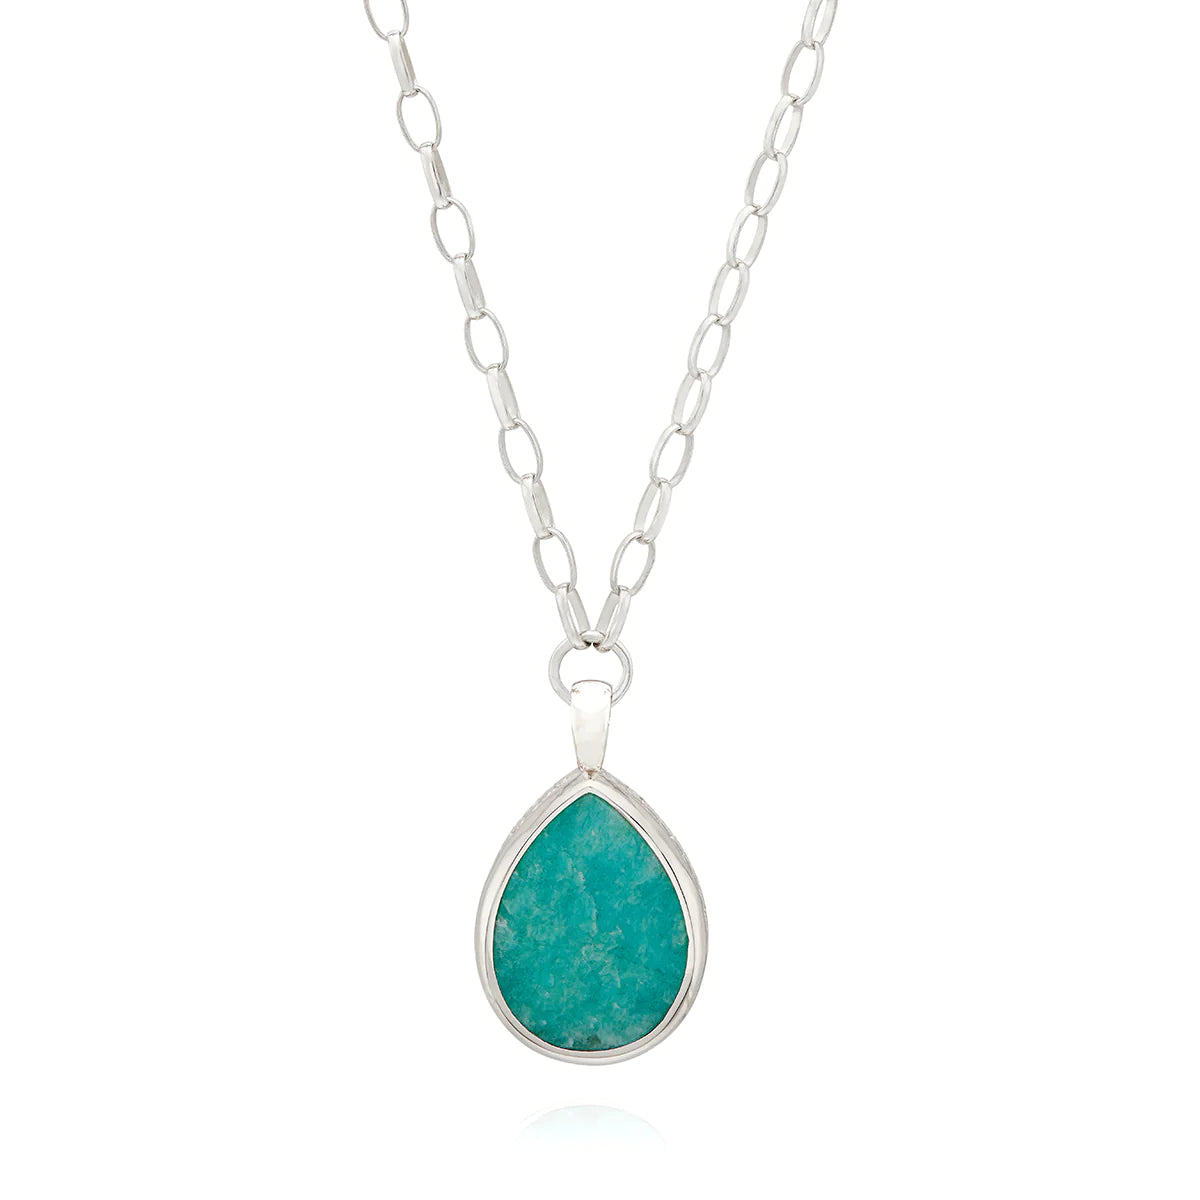 Silver amazonite teardrop pendant necklace on silver plated chain